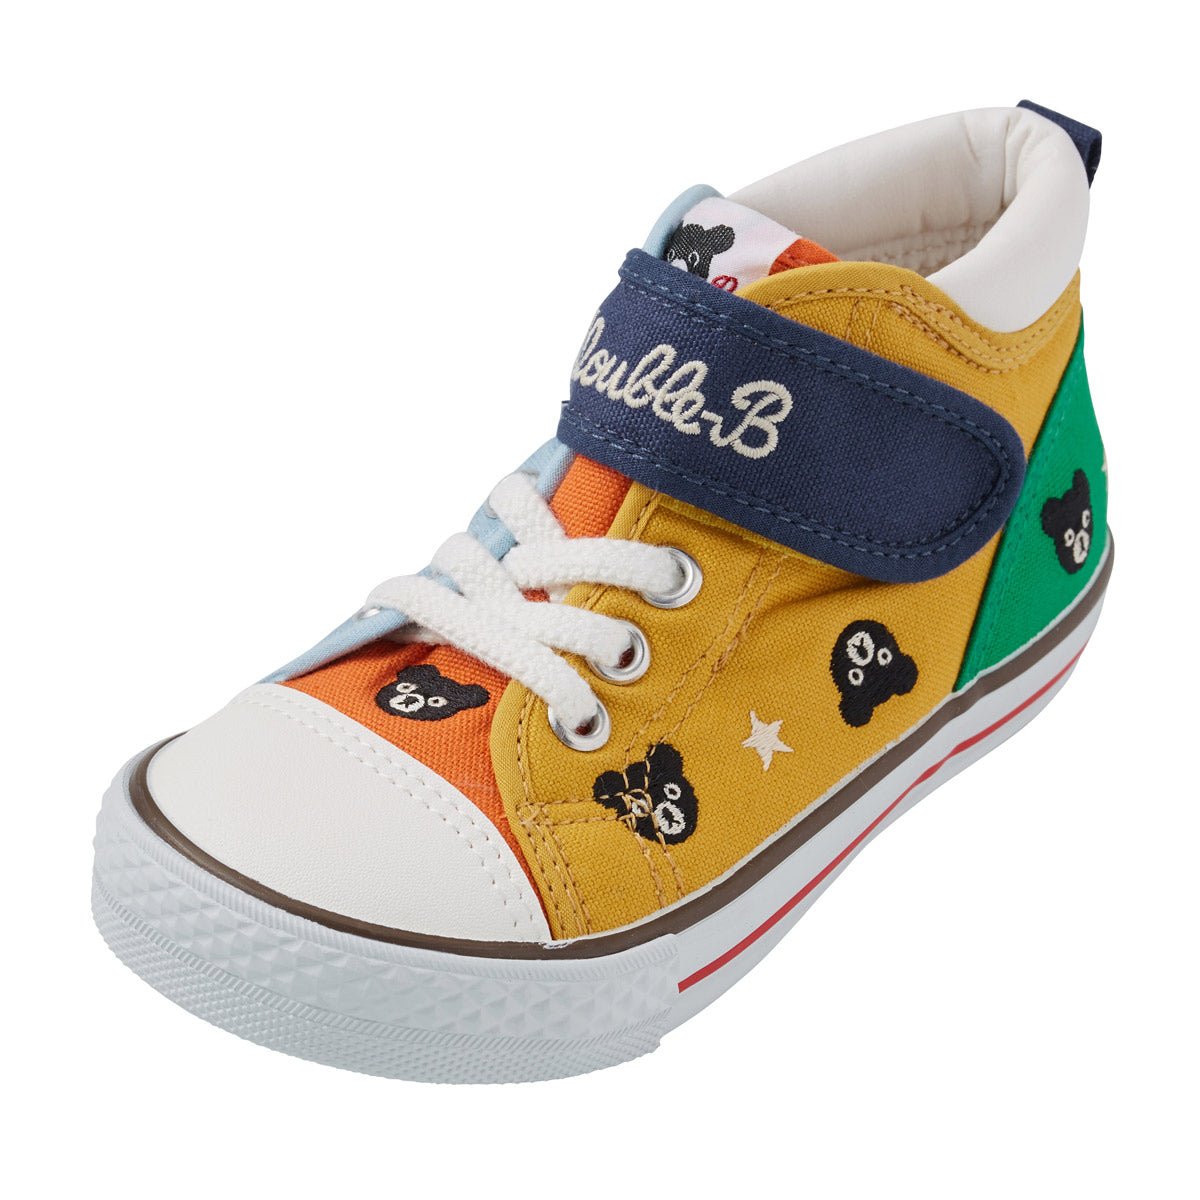 DOUBLE_B High Top Sneakers for Kids- B-kun and Stars Embroidery - 63-9402-820-87-16